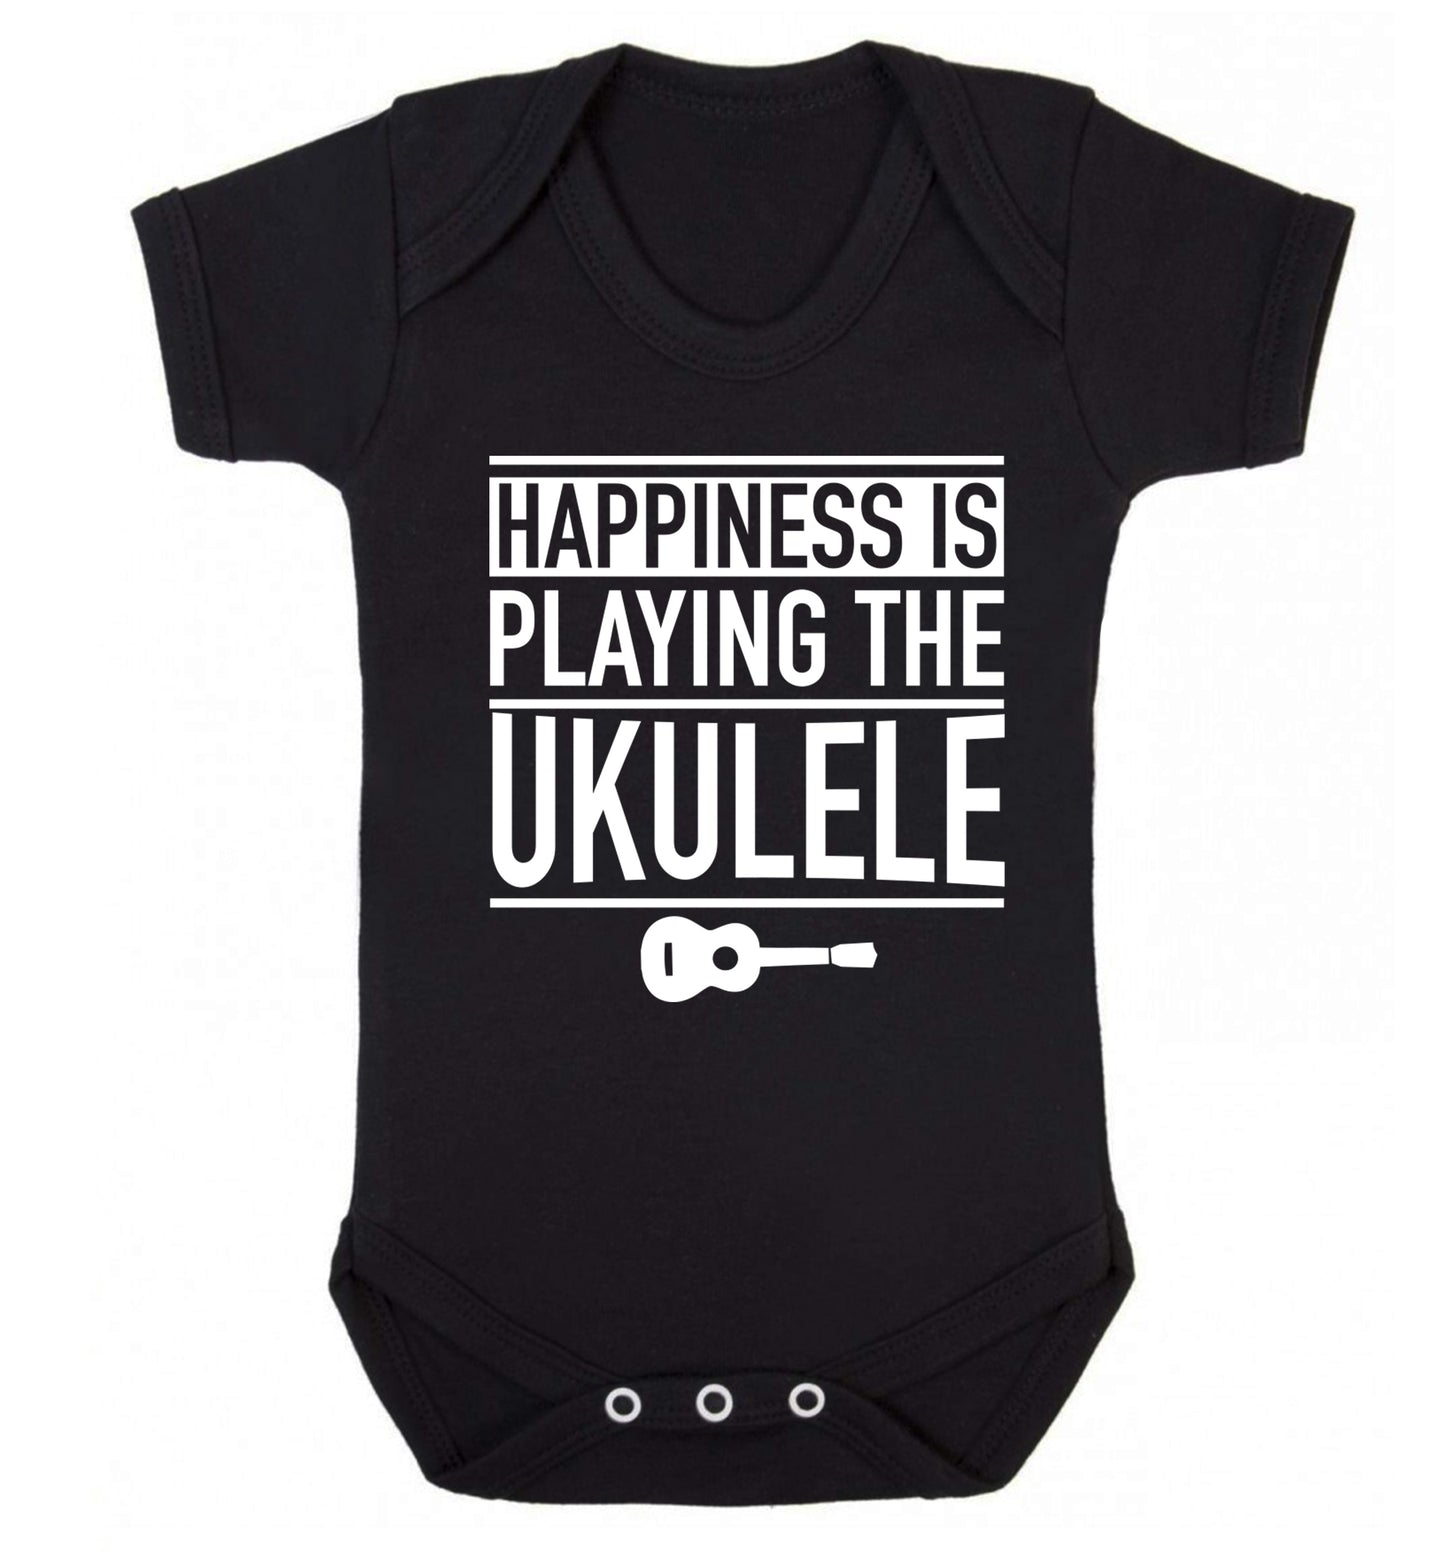 Happines is playing the ukulele Baby Vest black 18-24 months